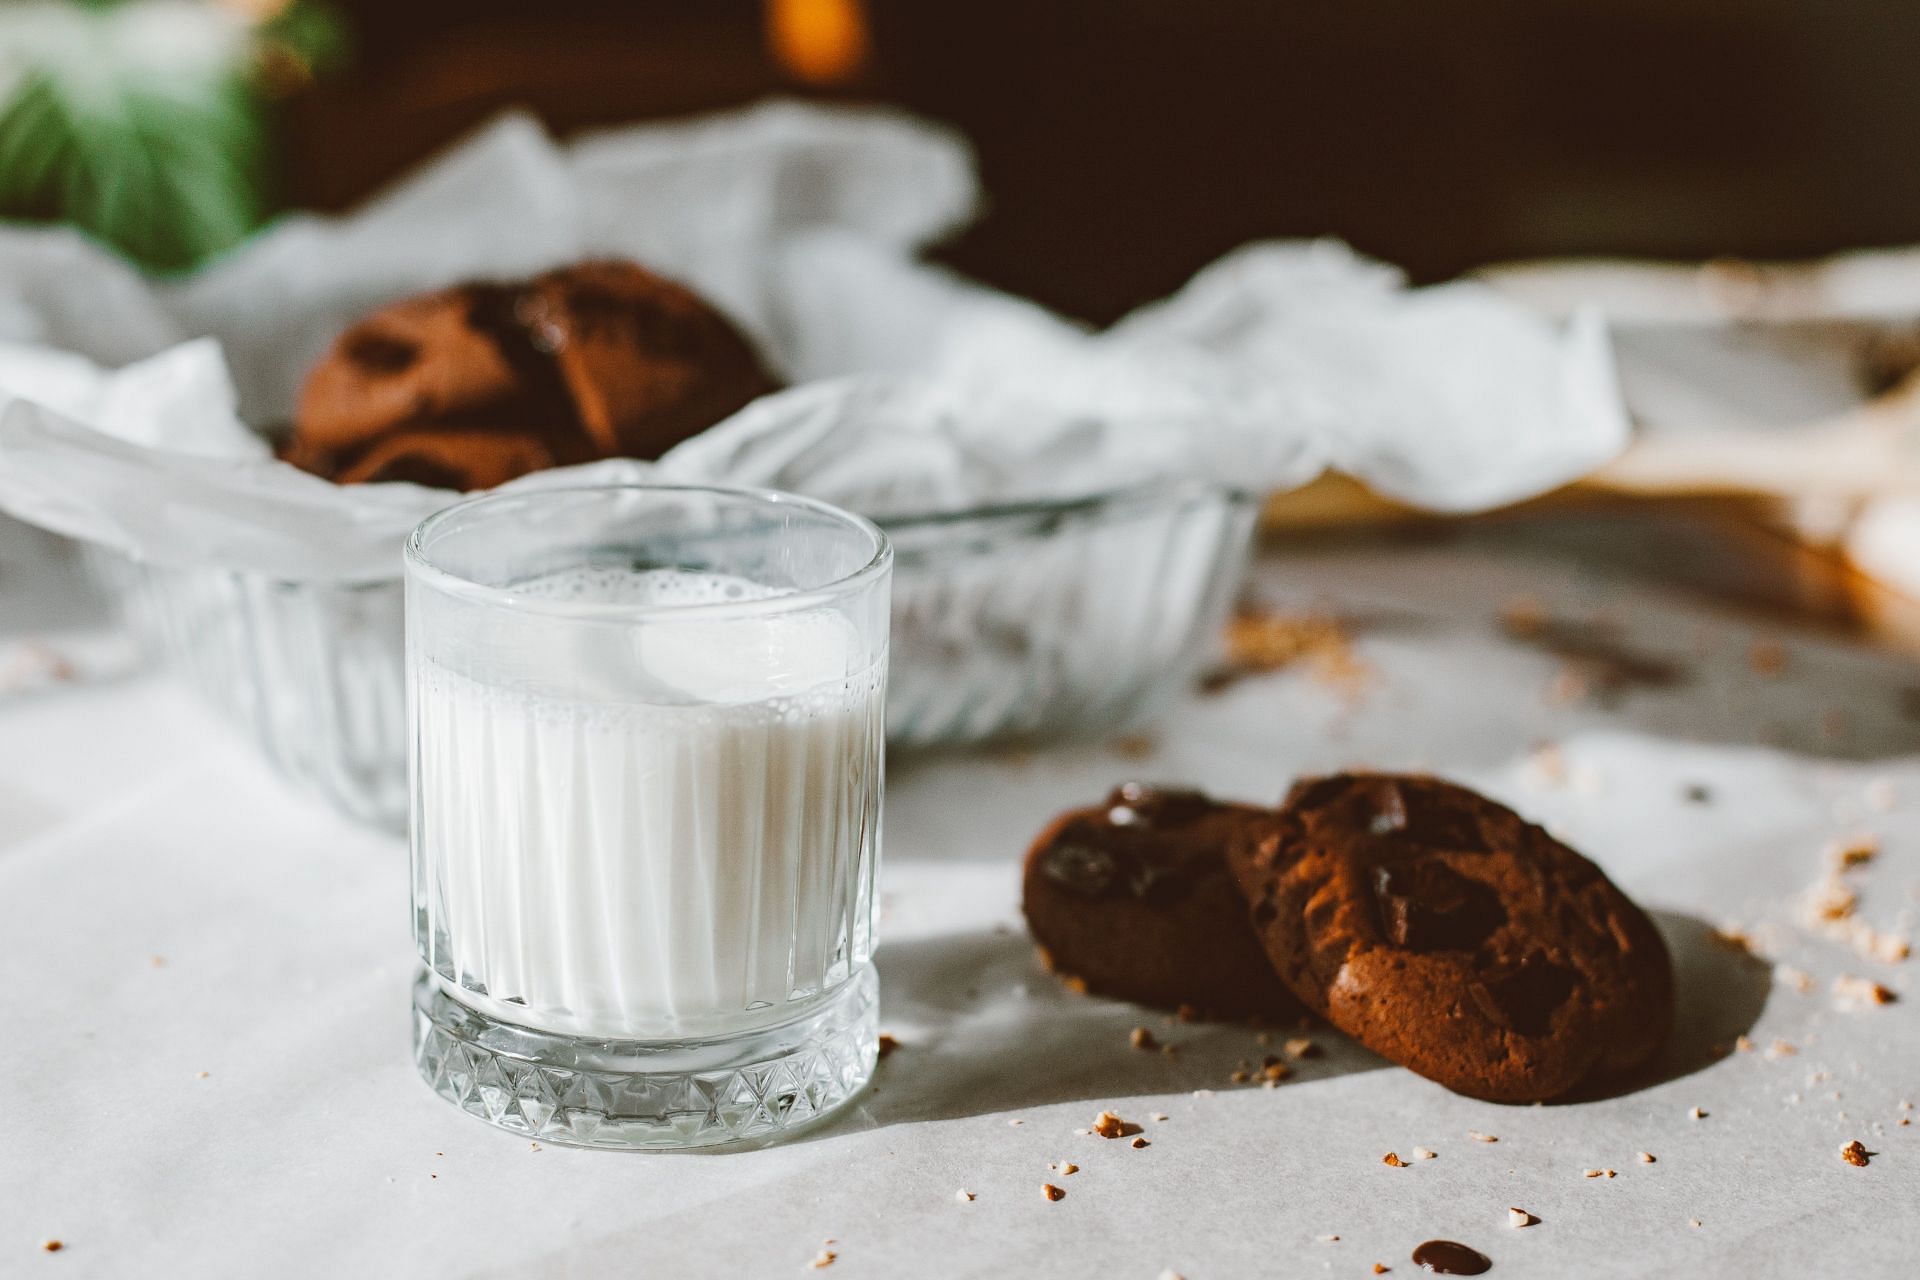 Organic and conventional milk contains the same amount of protein. (Image via Pexels/ Roman Odintsov)